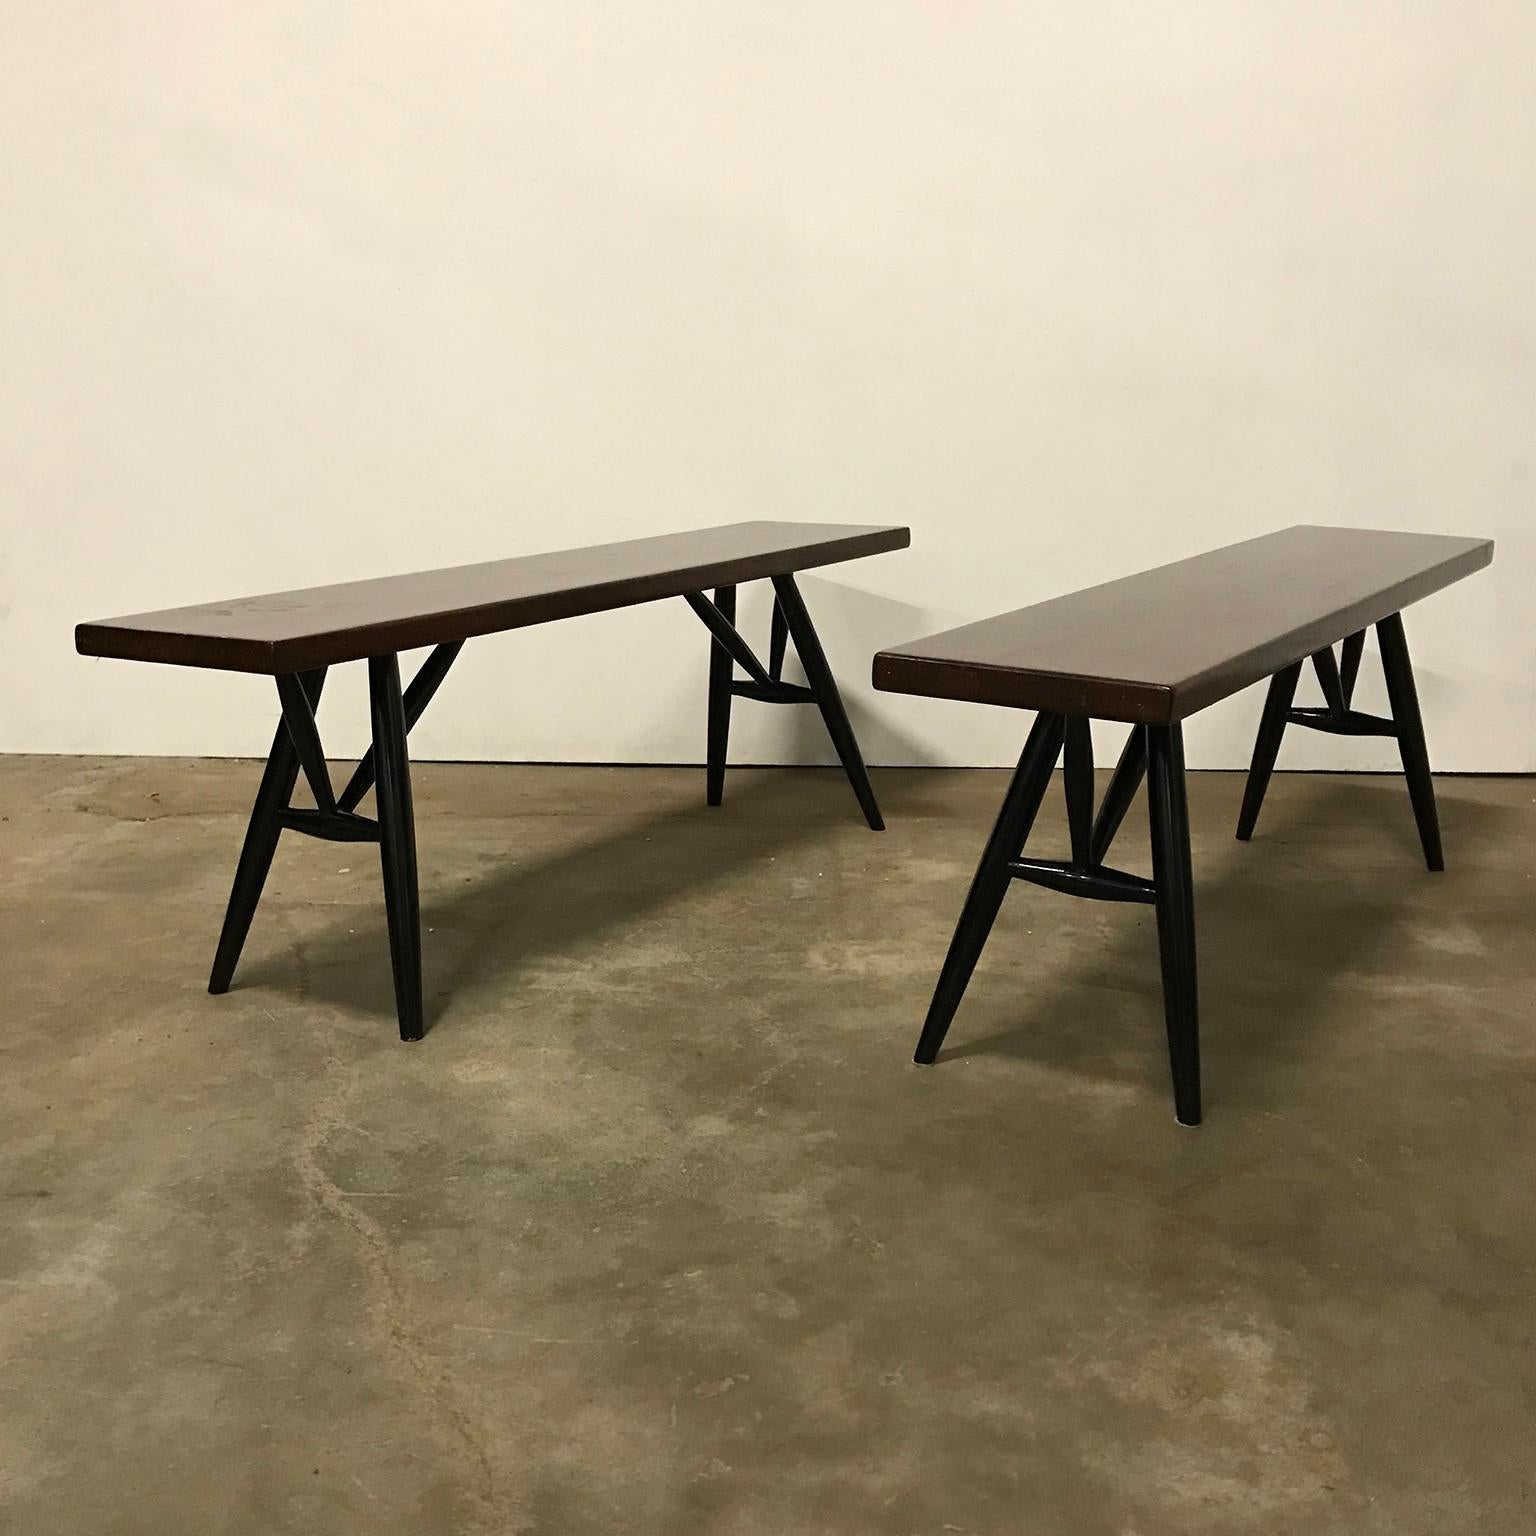 Two Pirkka benches with beautiful red brown wooden top. The benches are in good condition with some traces of wear like just some scratches and tiny damages (pictures #15 and #16). Also some white paint stains at the side (#17 and #18), which can be